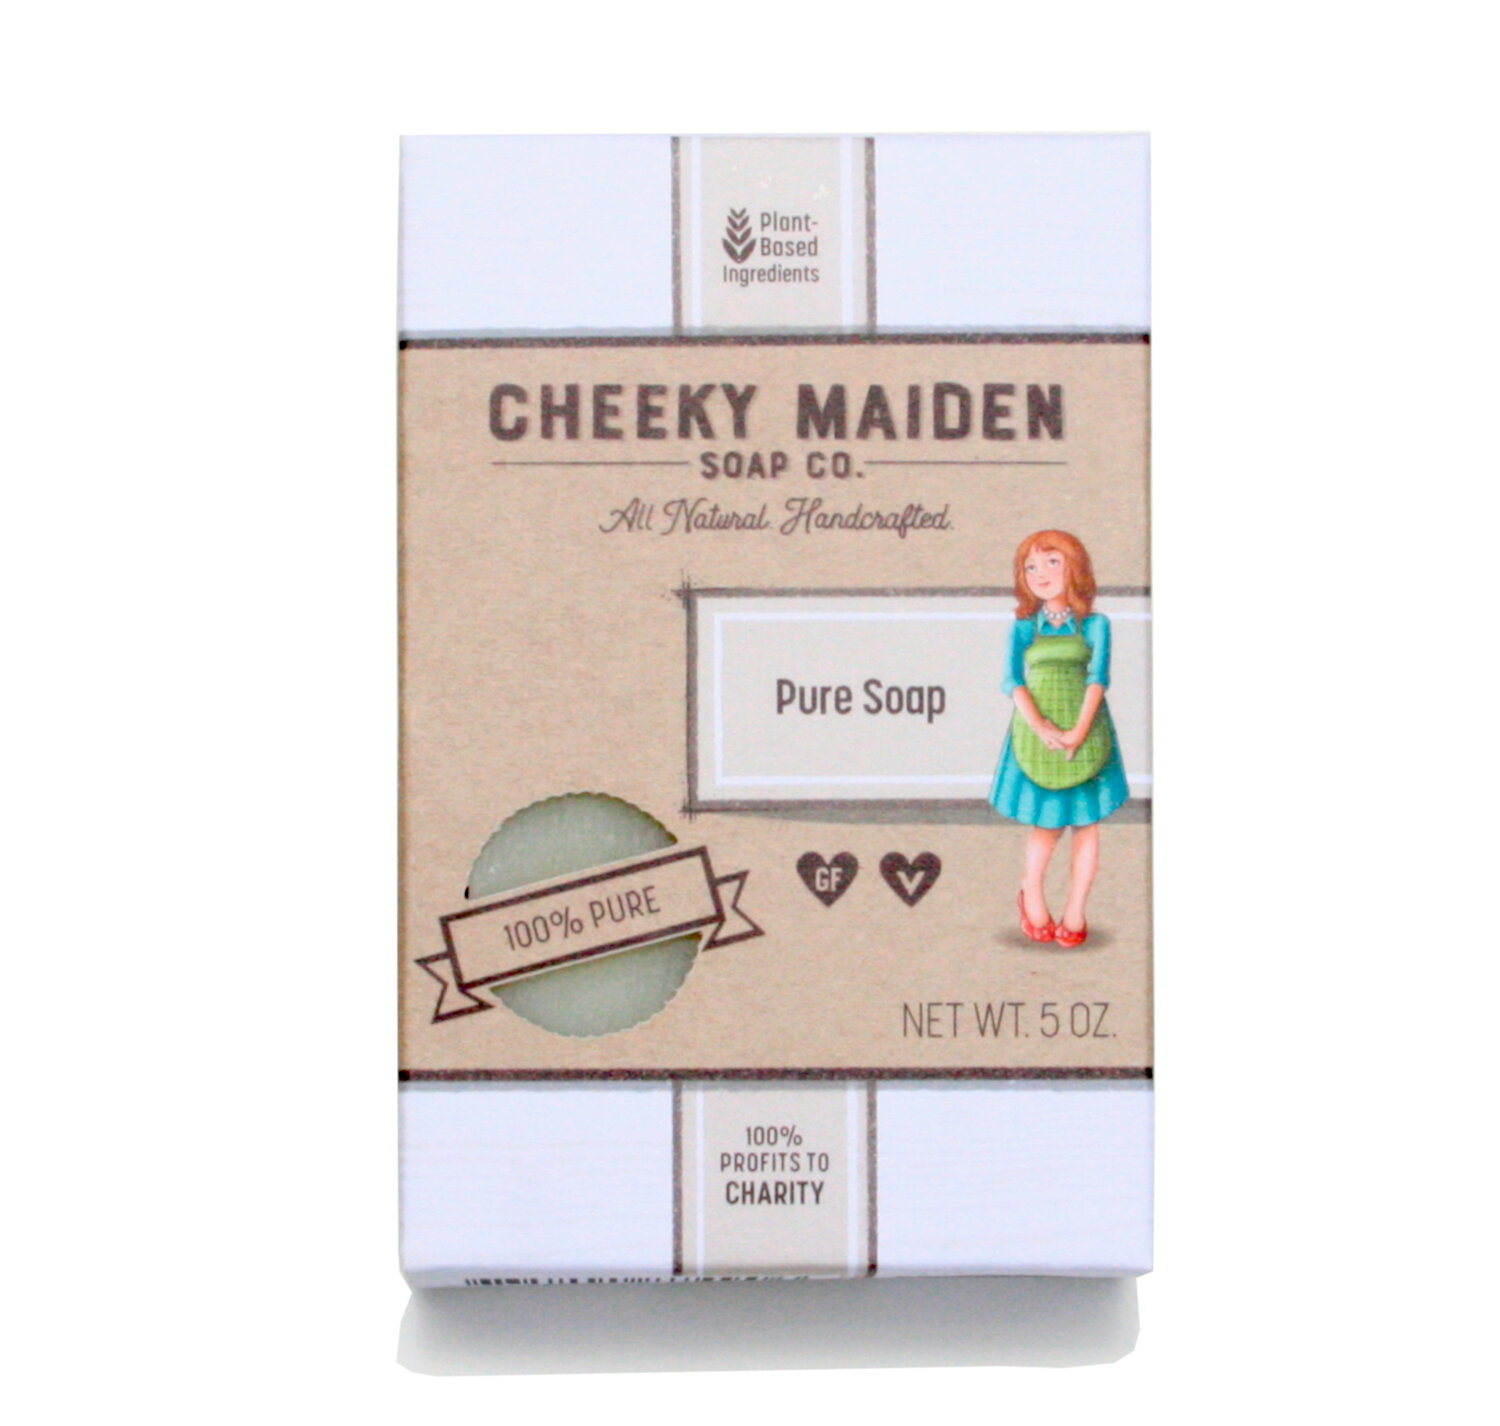 Pure Soap - Cheeky Maiden Soap Co